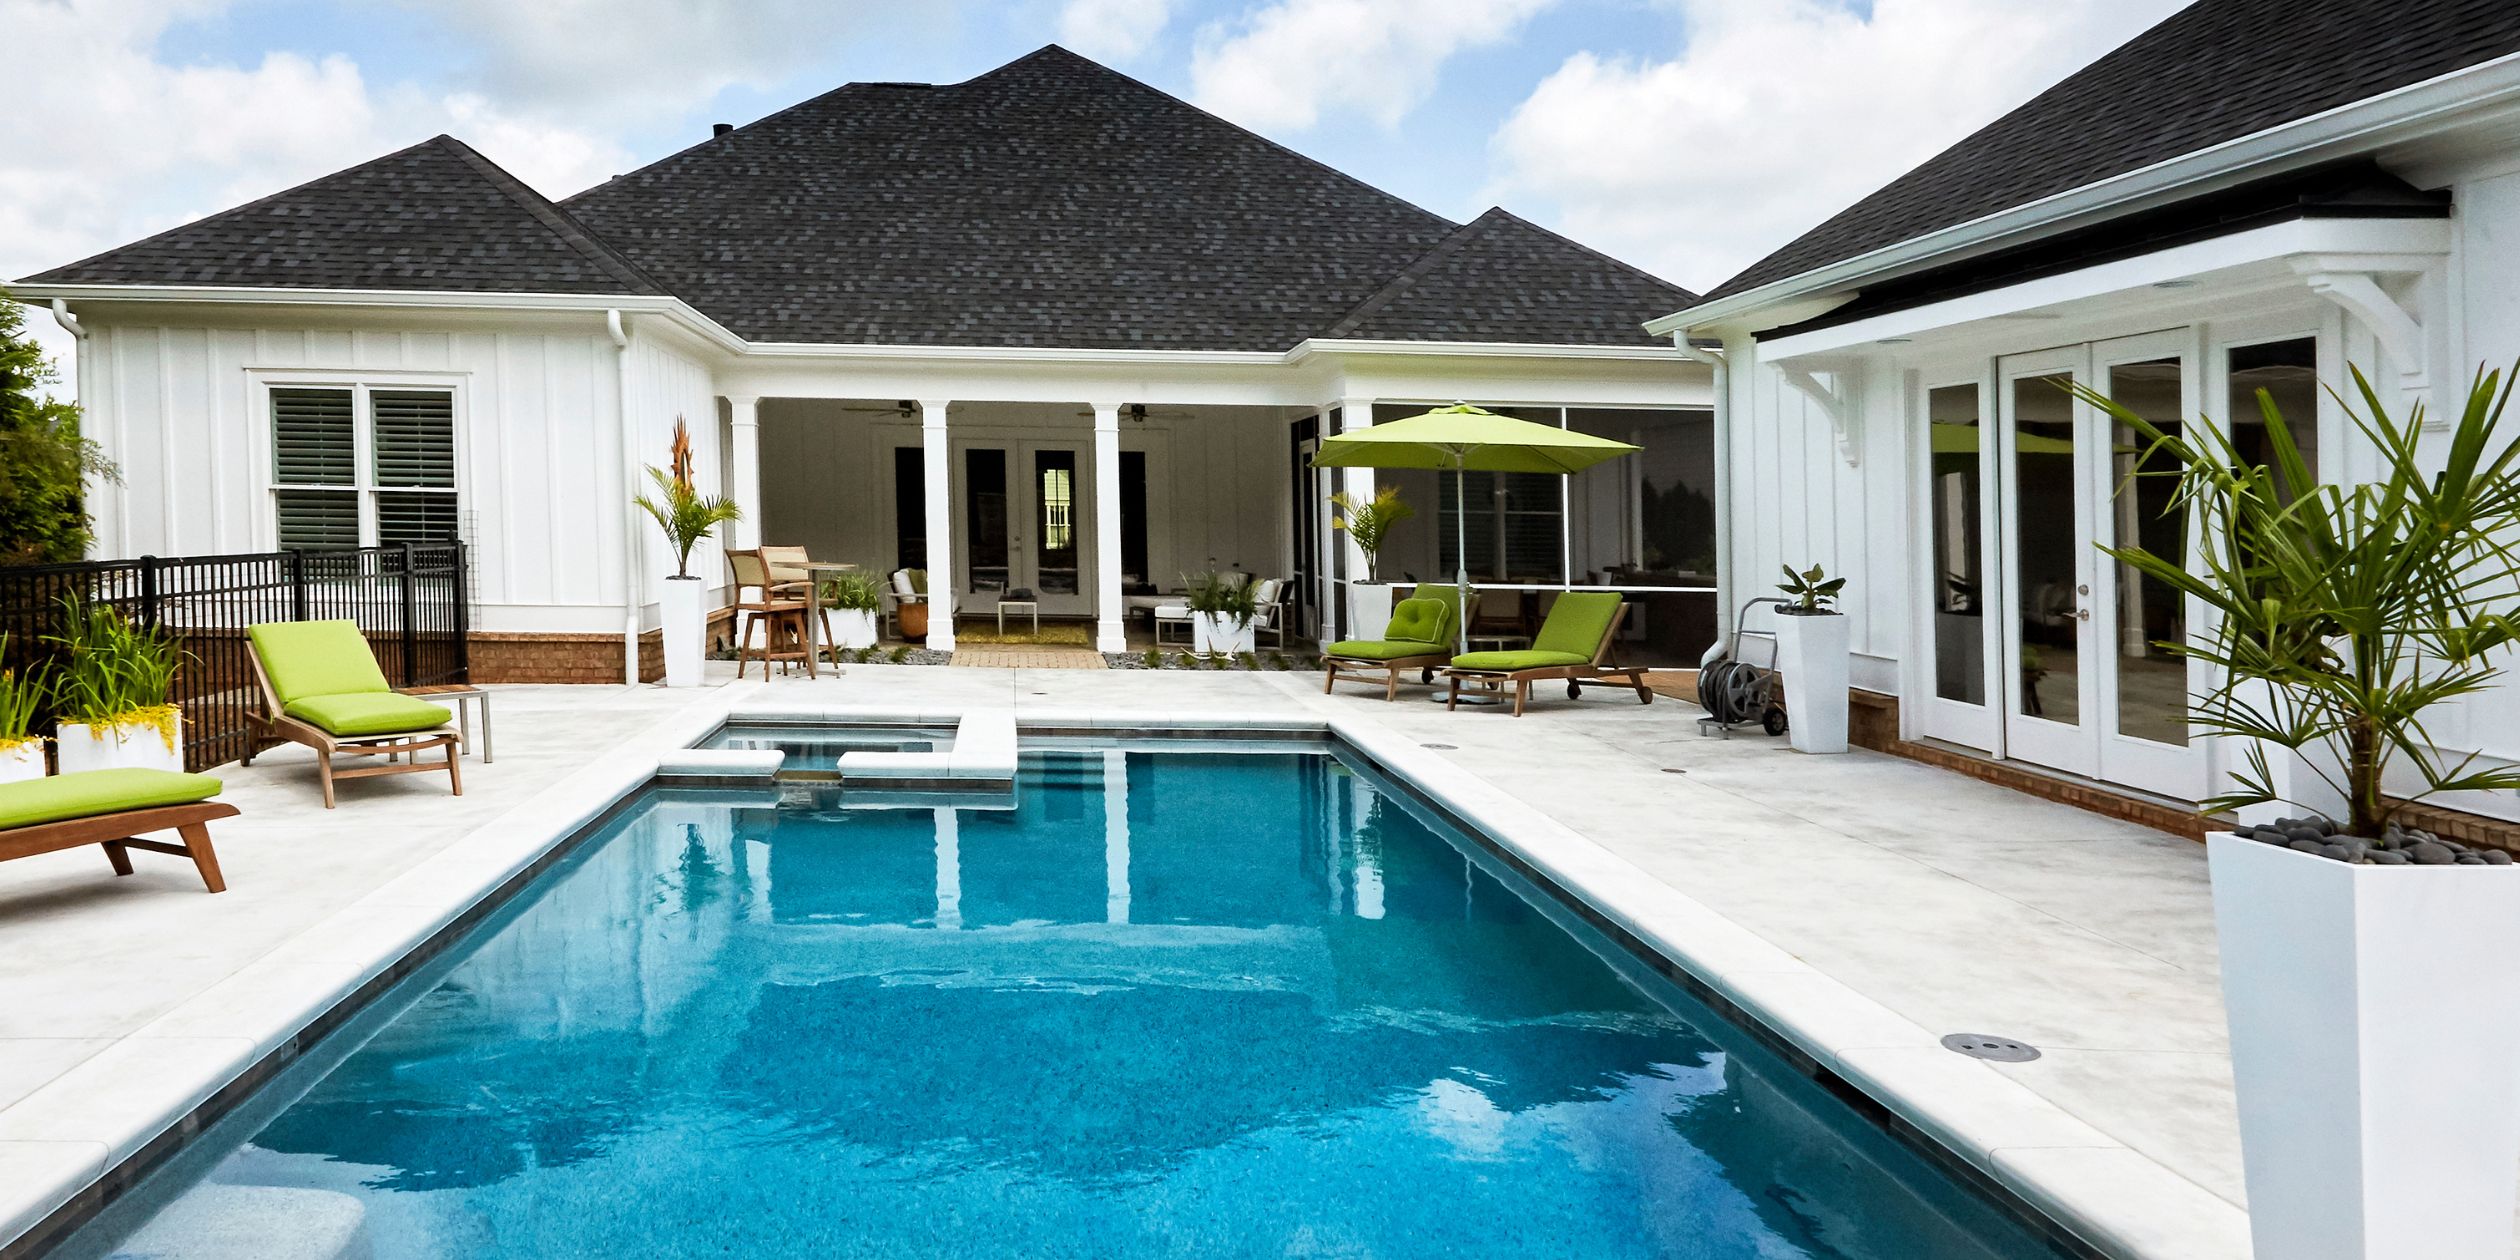 2023 Swimming Pool Trends: What You Need to Know for this Summer